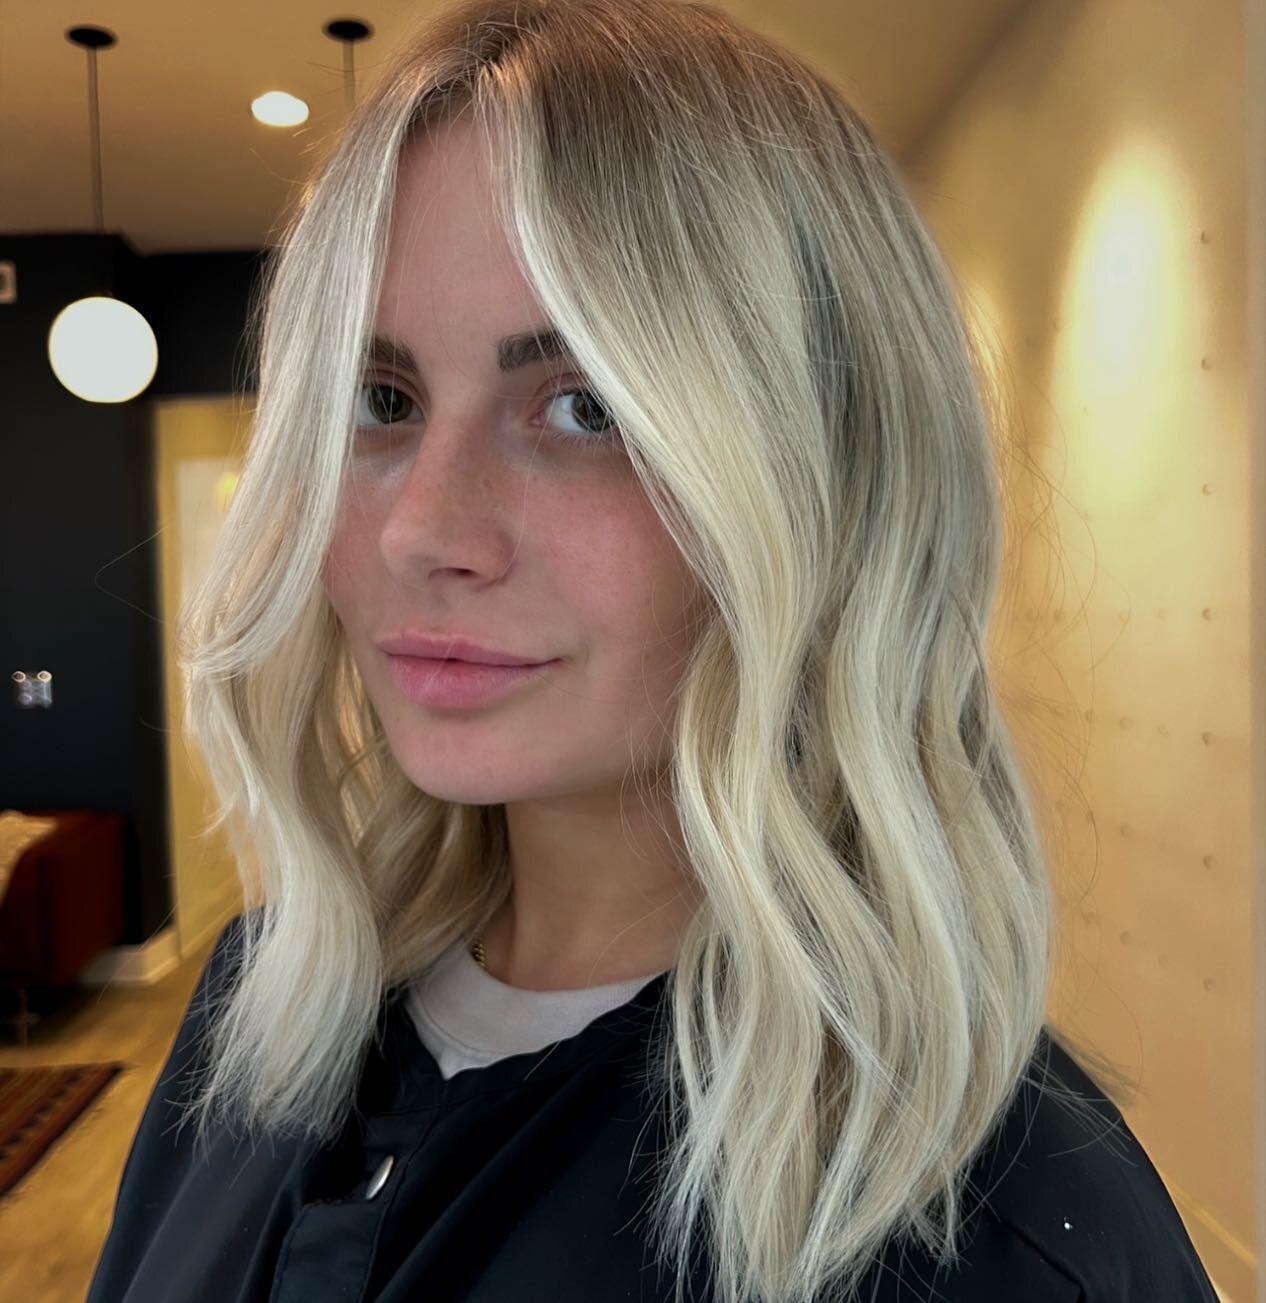 Let&rsquo;s Give This Another Angle 🙌
.
#mobawards_blonde2023 
#mobawards_faceframe2023 
.
Prepped and Finished using @k18hair 
. 
Lifted using @lorealpro  studio 9
.
Styled using @t3micro 
.
Mane breakdown using @redken 
Mane Root : 6N | 6T @redken